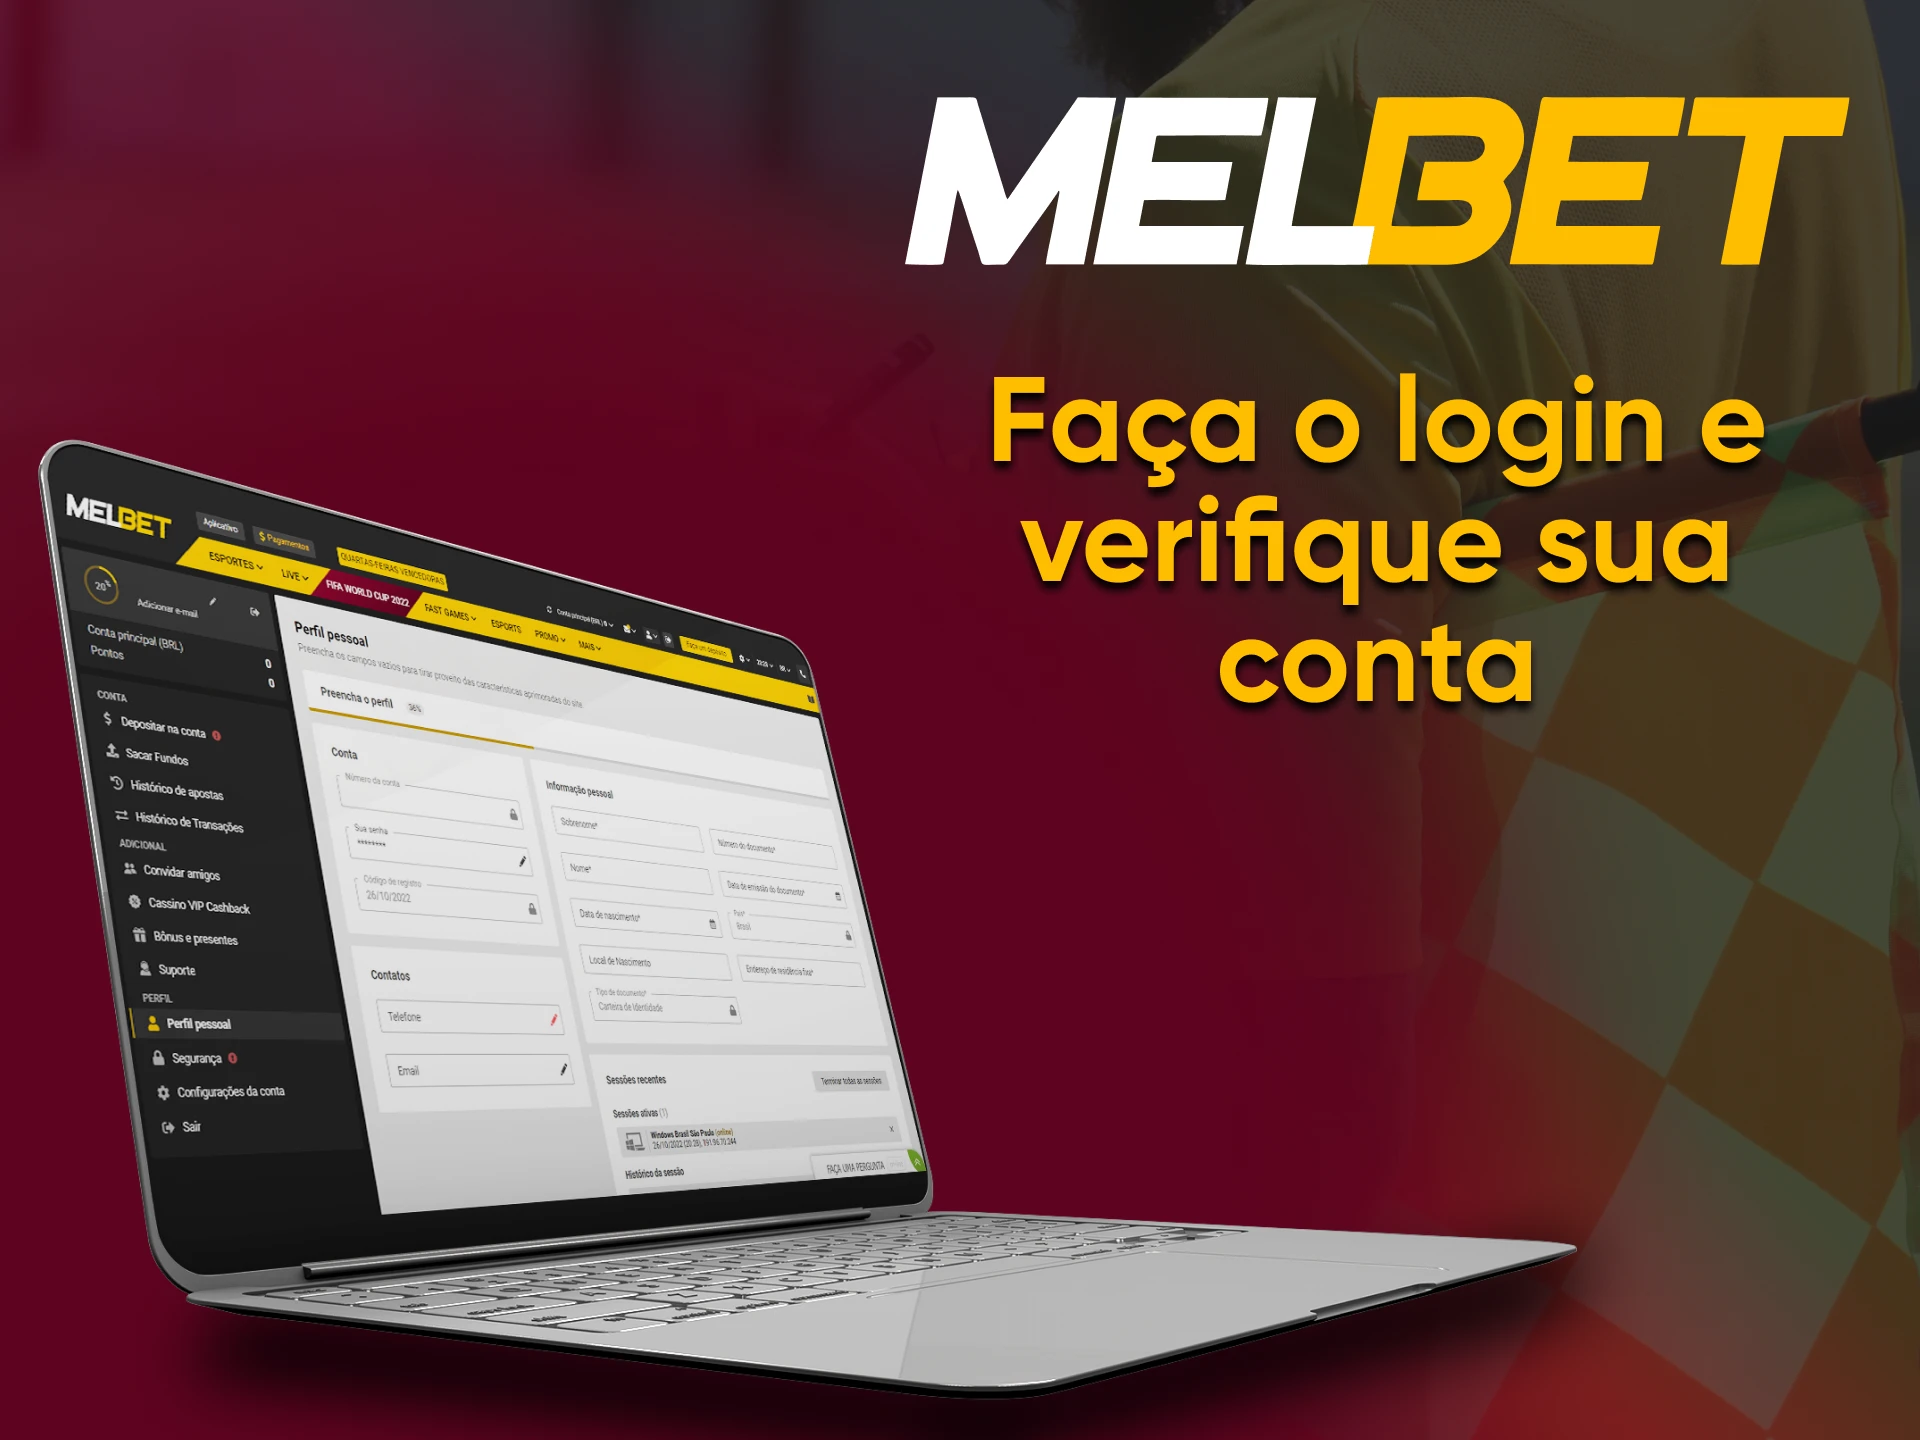 For further use, you must go through Melbet's account verification process.